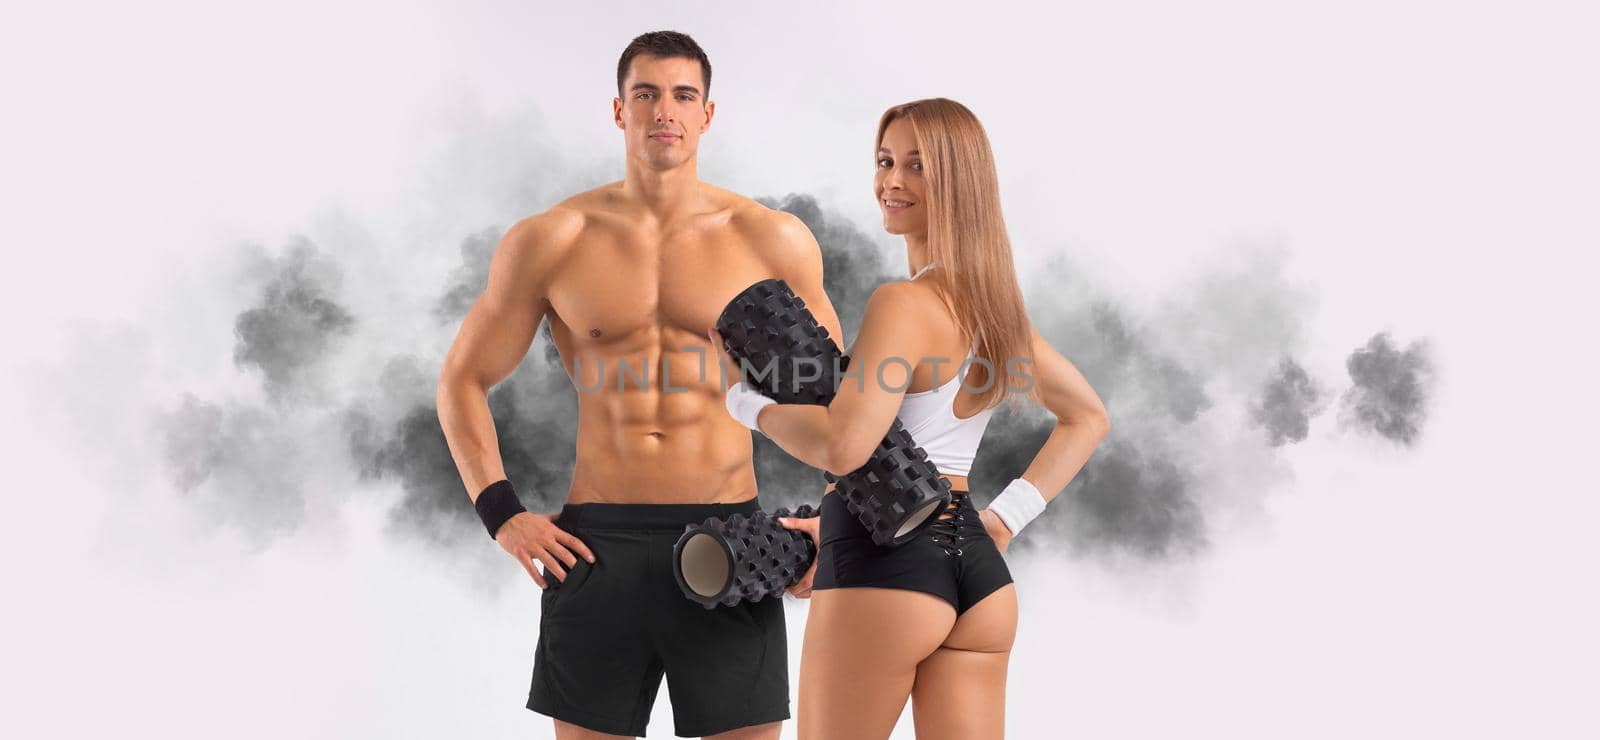 Fit couple at the gym isolated on white background. Fitness concept. Healthy life style. by MikeOrlov